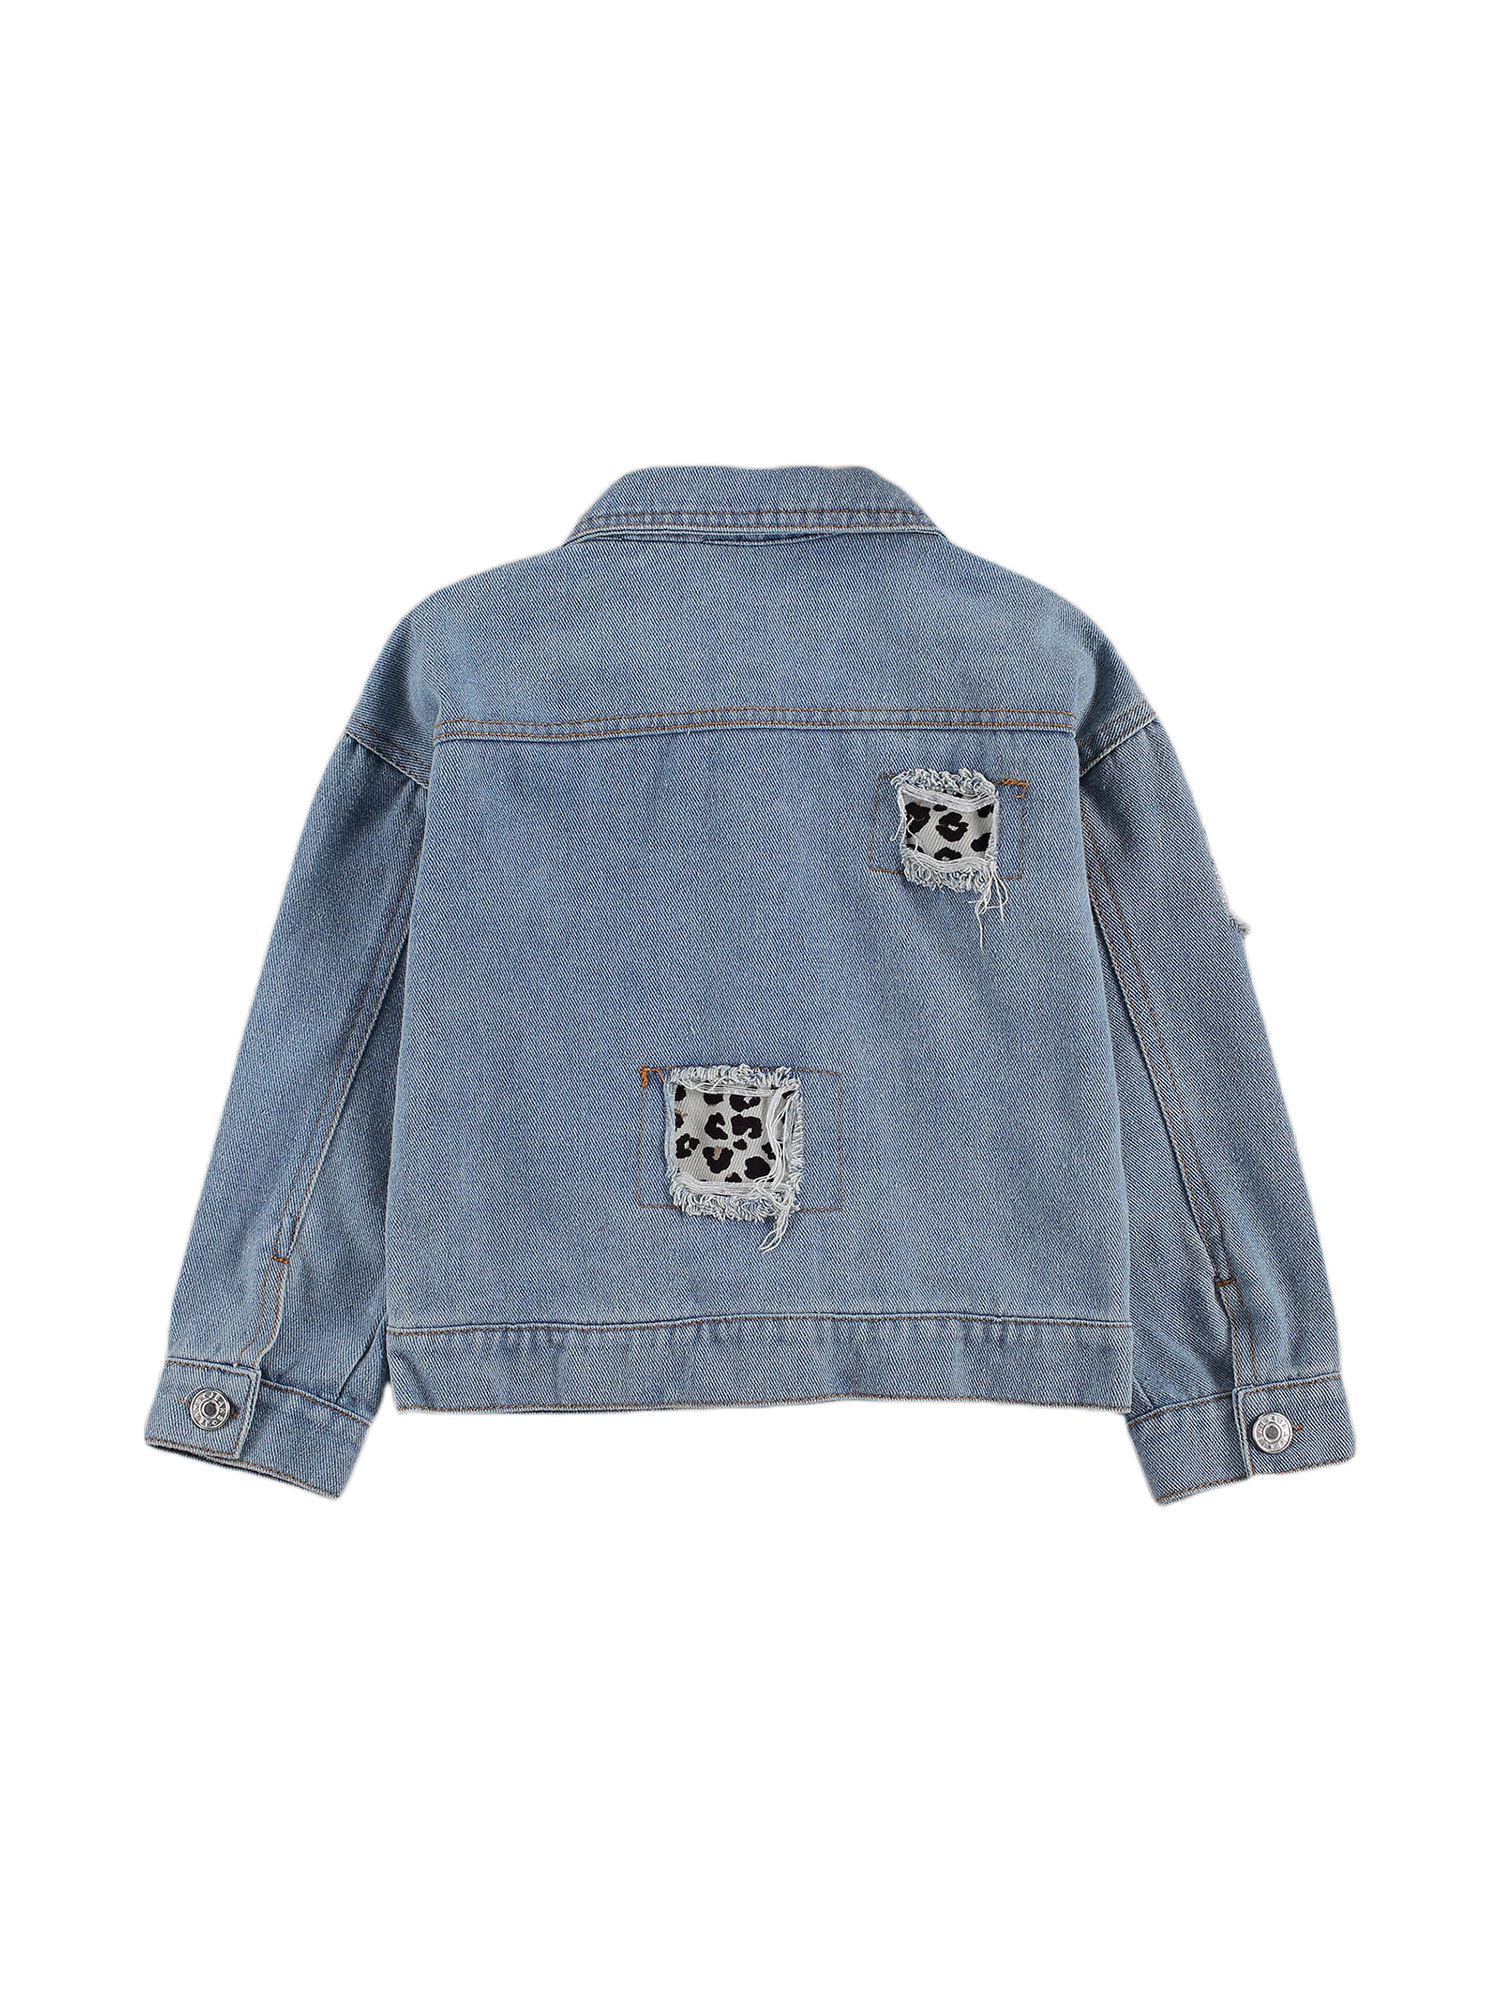 Toddler Baby Girl Coat Long Sleeve Denim Jacket Sequin Pockets Ripped Jean Jacket Outwear 1-6T - image 3 of 9